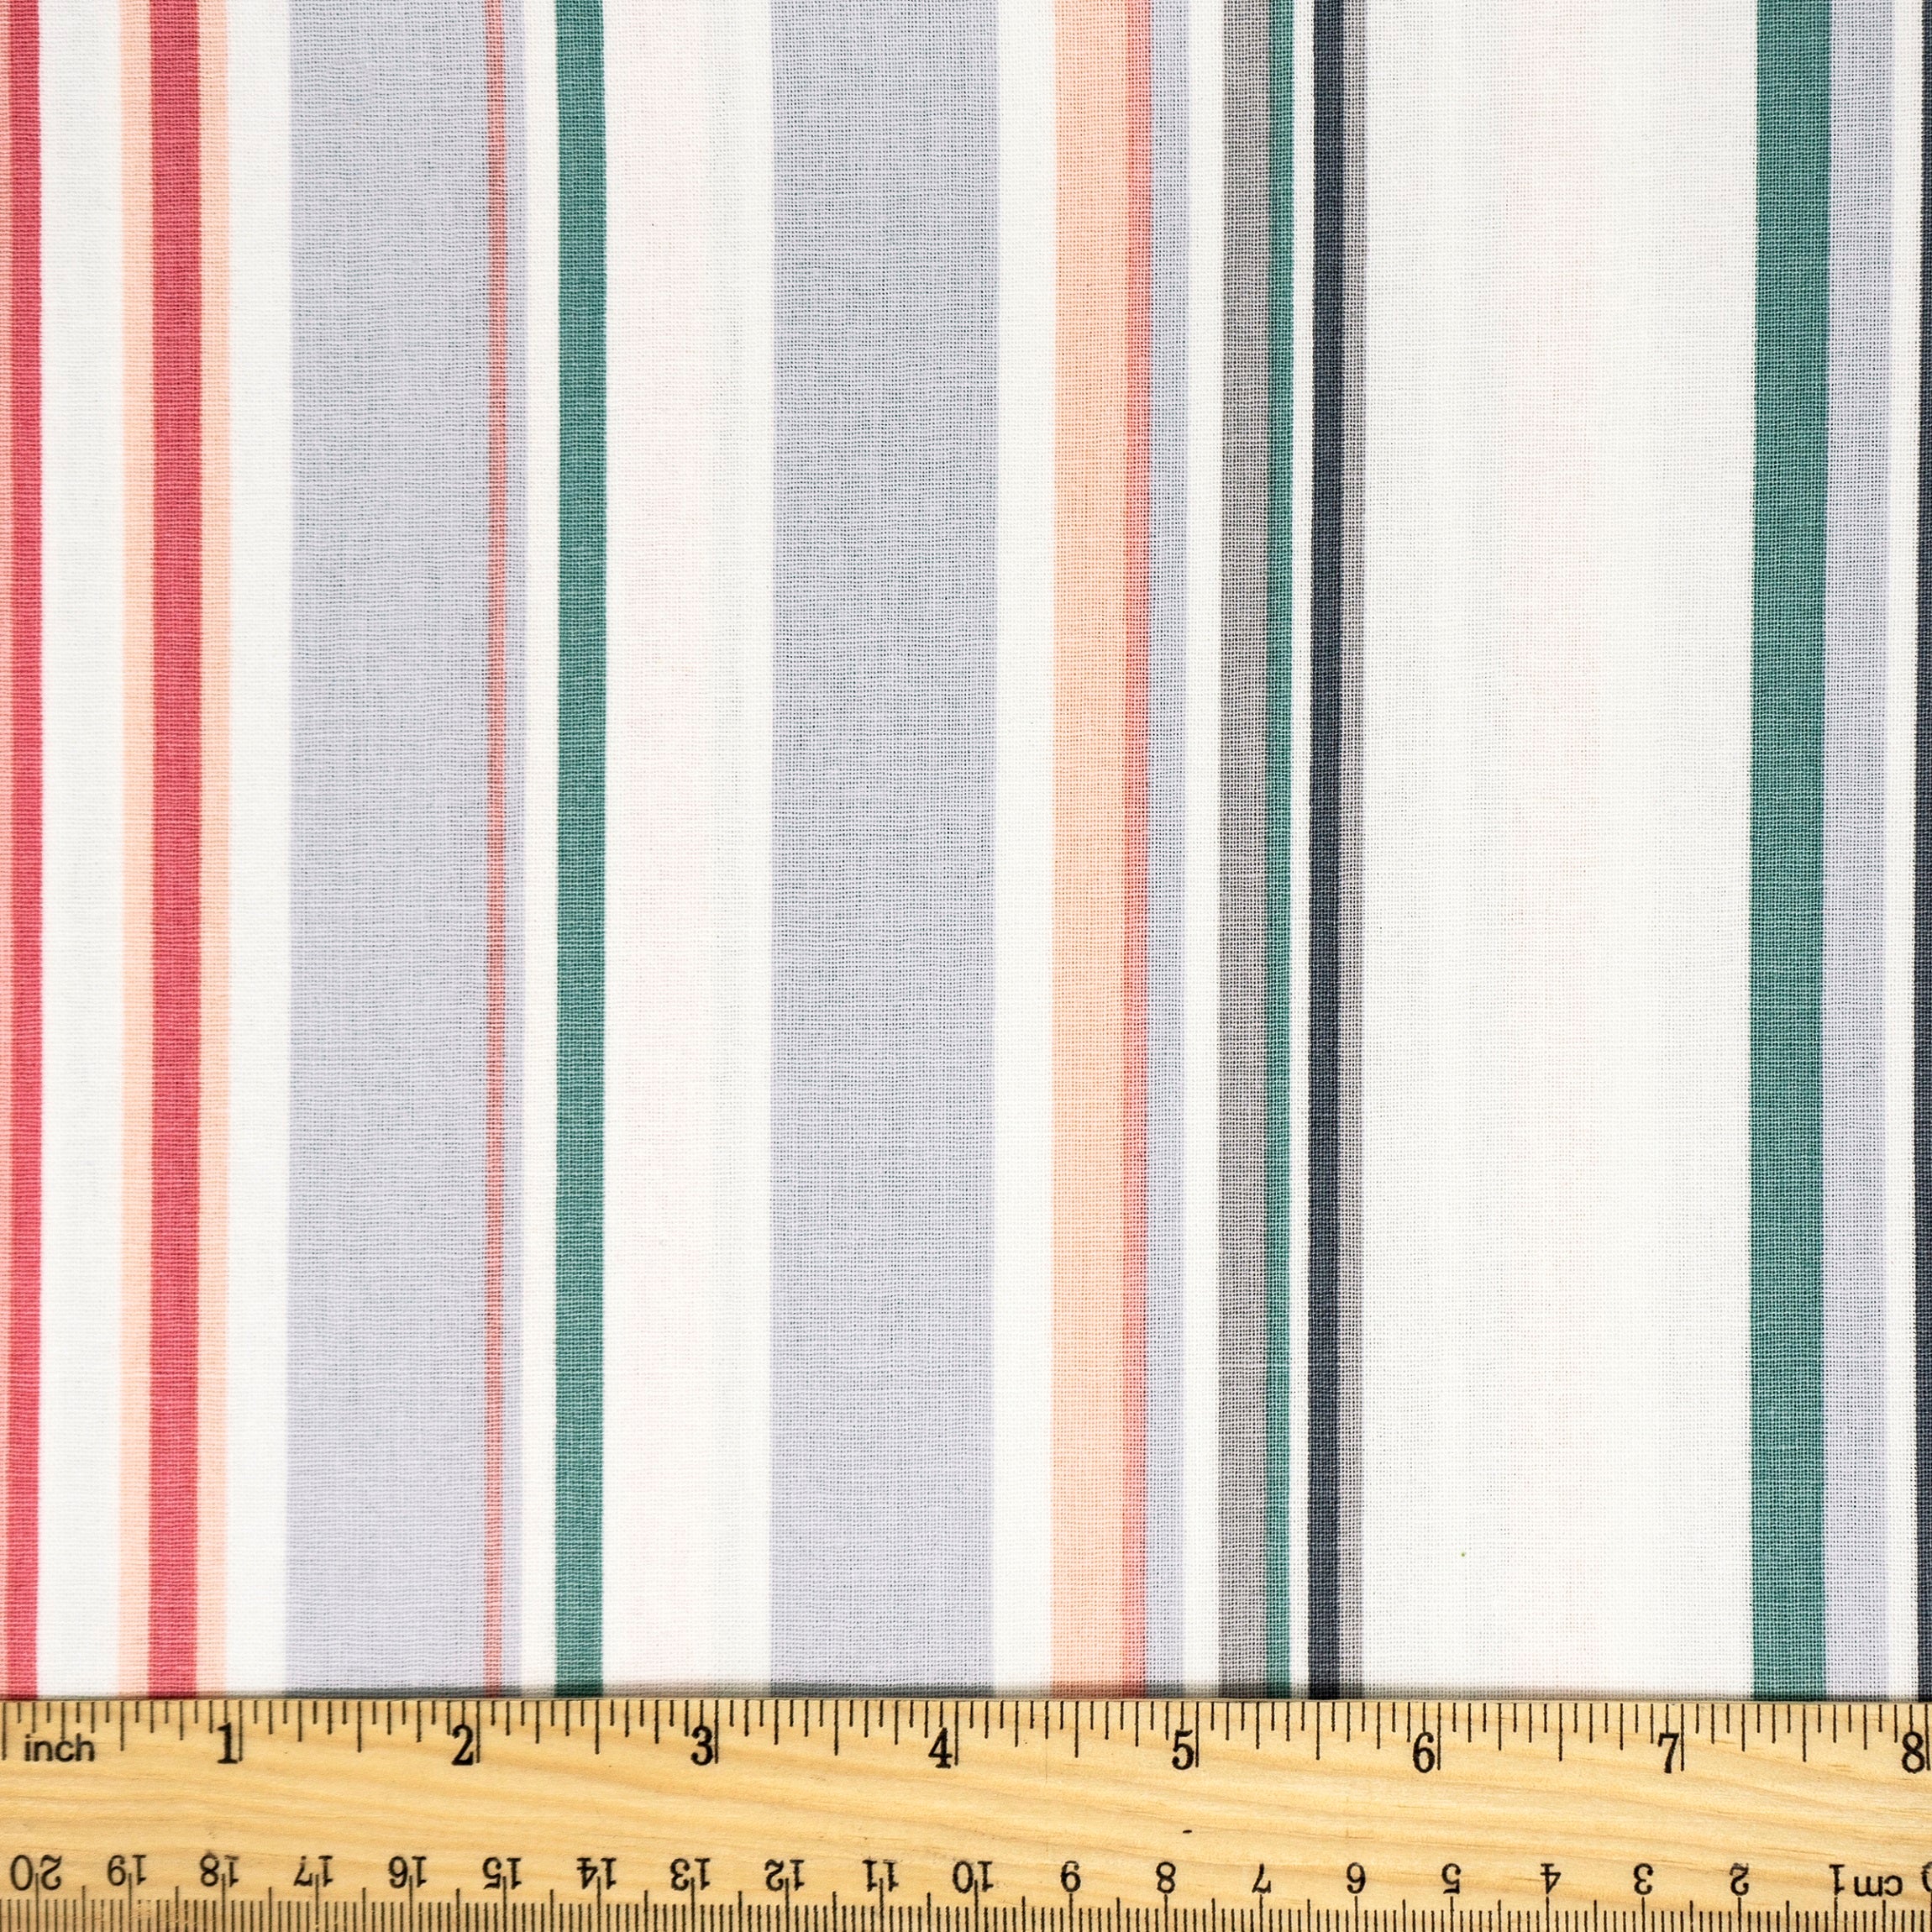 Waverly Inspirations 44" 100% Cotton Multi Stripe Sewing & Craft Fabric By the Yard, Multi-color